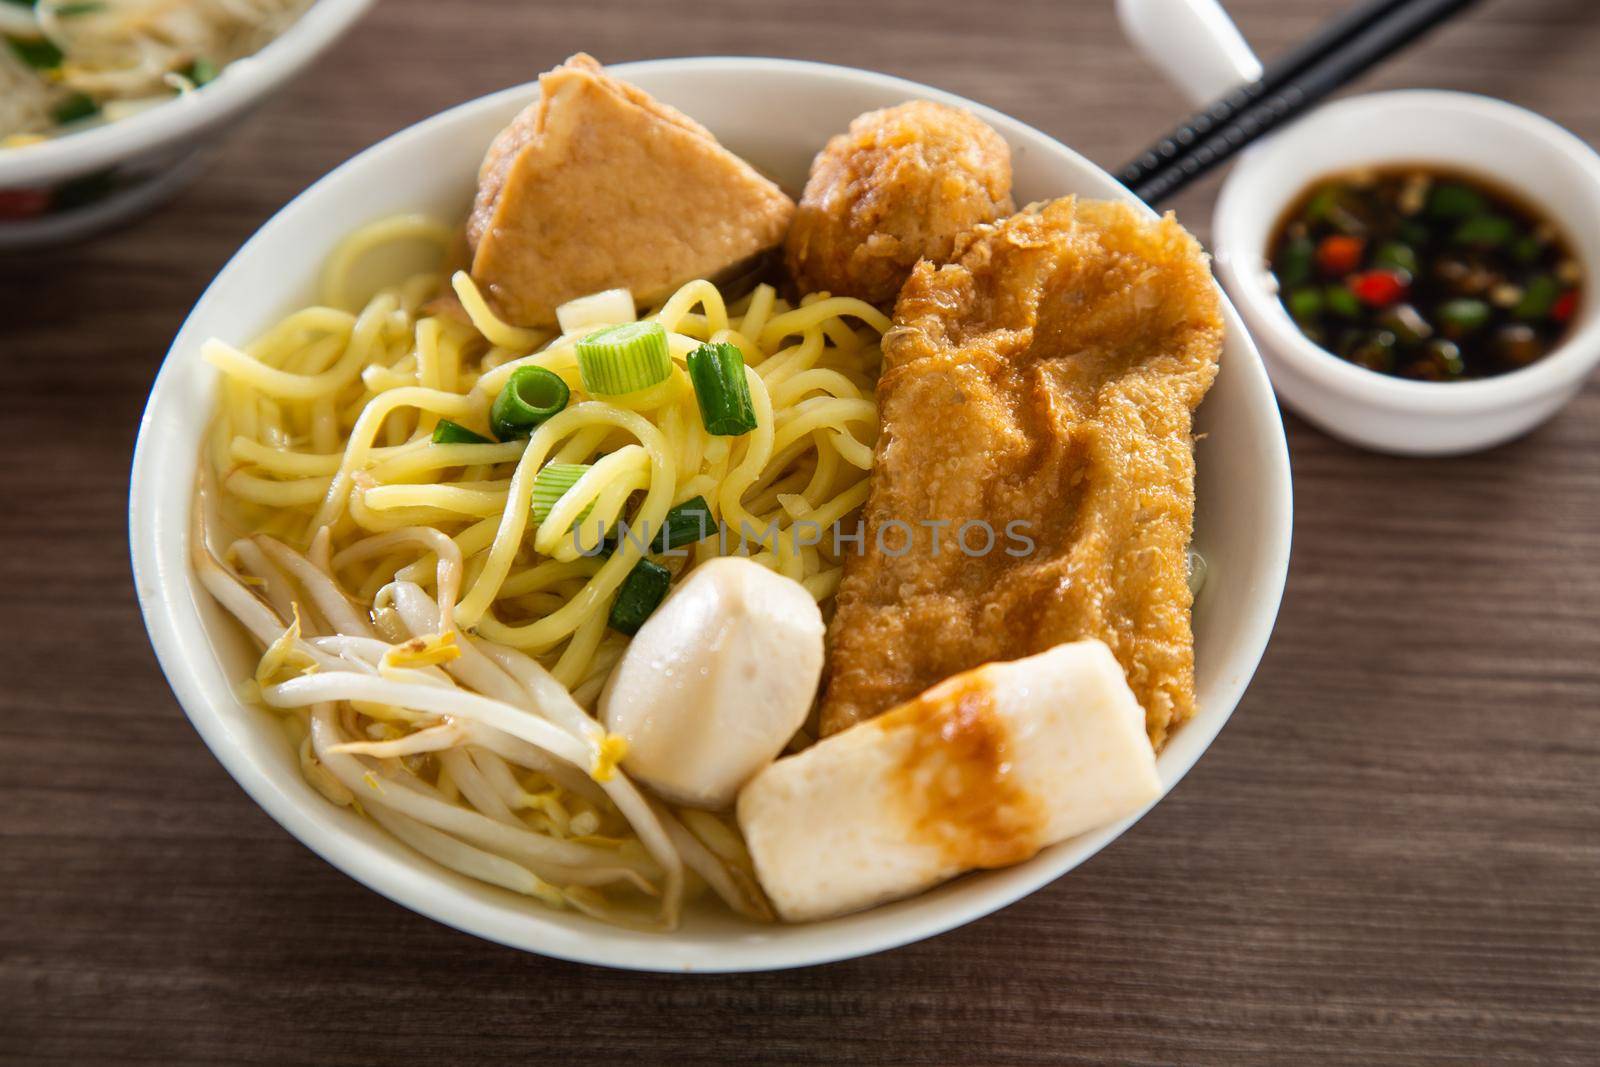 A bowl of Kampar fishball noodle soup with stuffed Yong Tau Foo by tehcheesiong